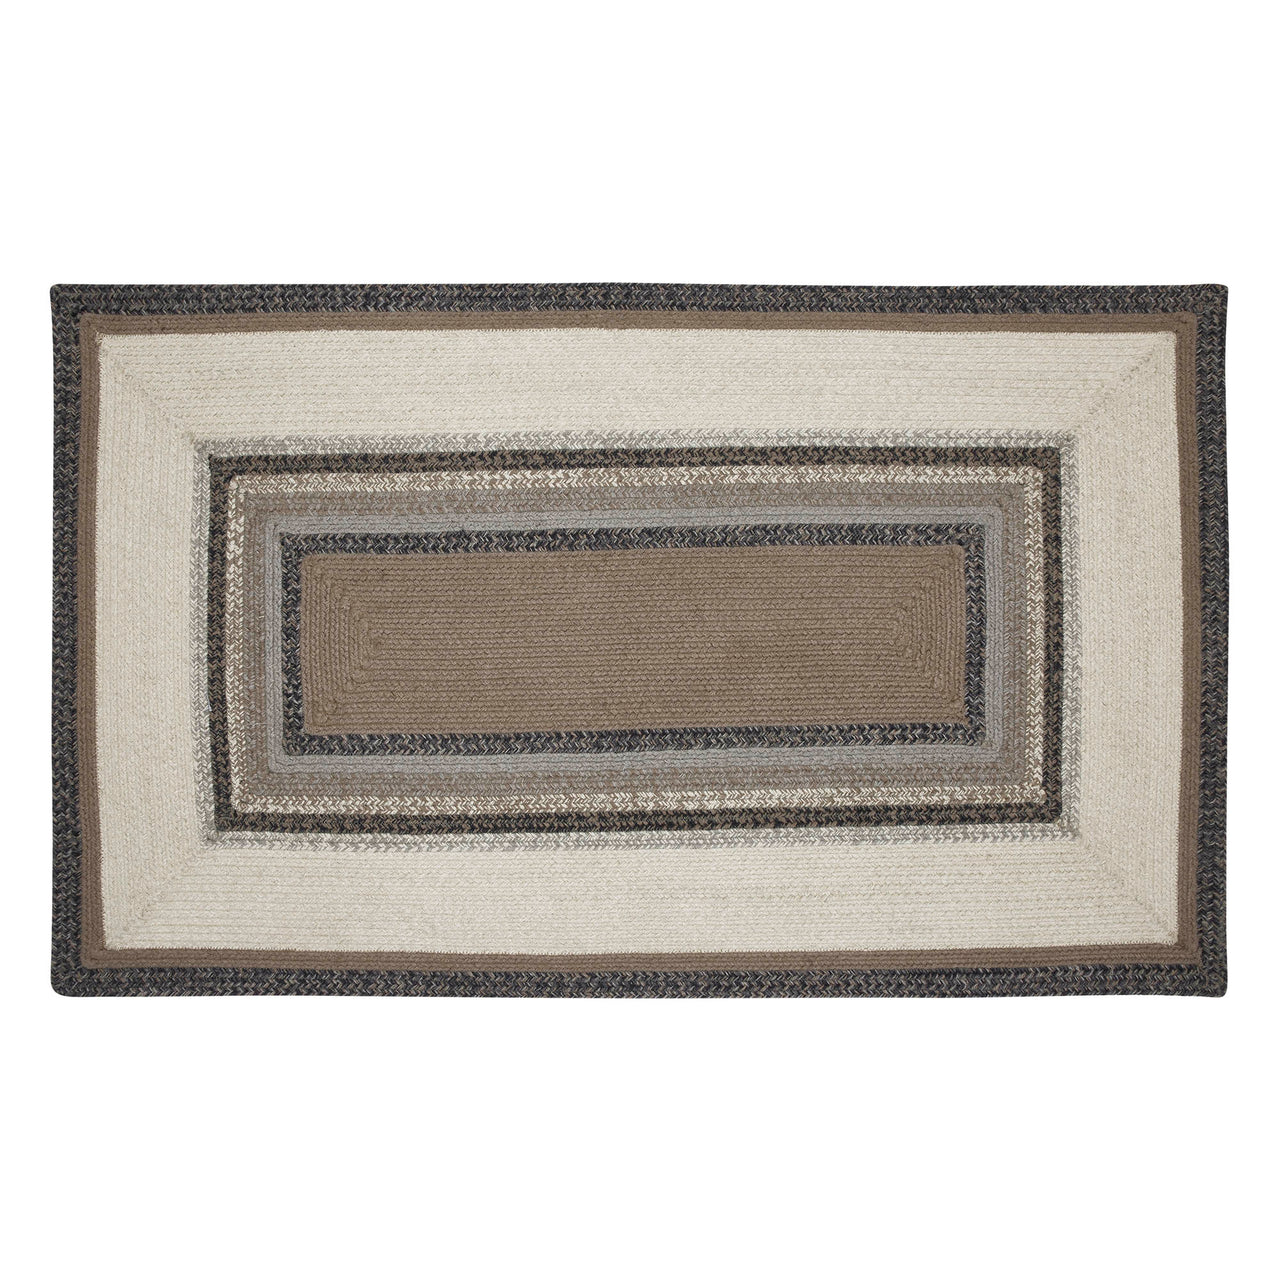 Floral Vine Jute Rectangle Braided Rug 3'x5' (36"x60") VHC Brands